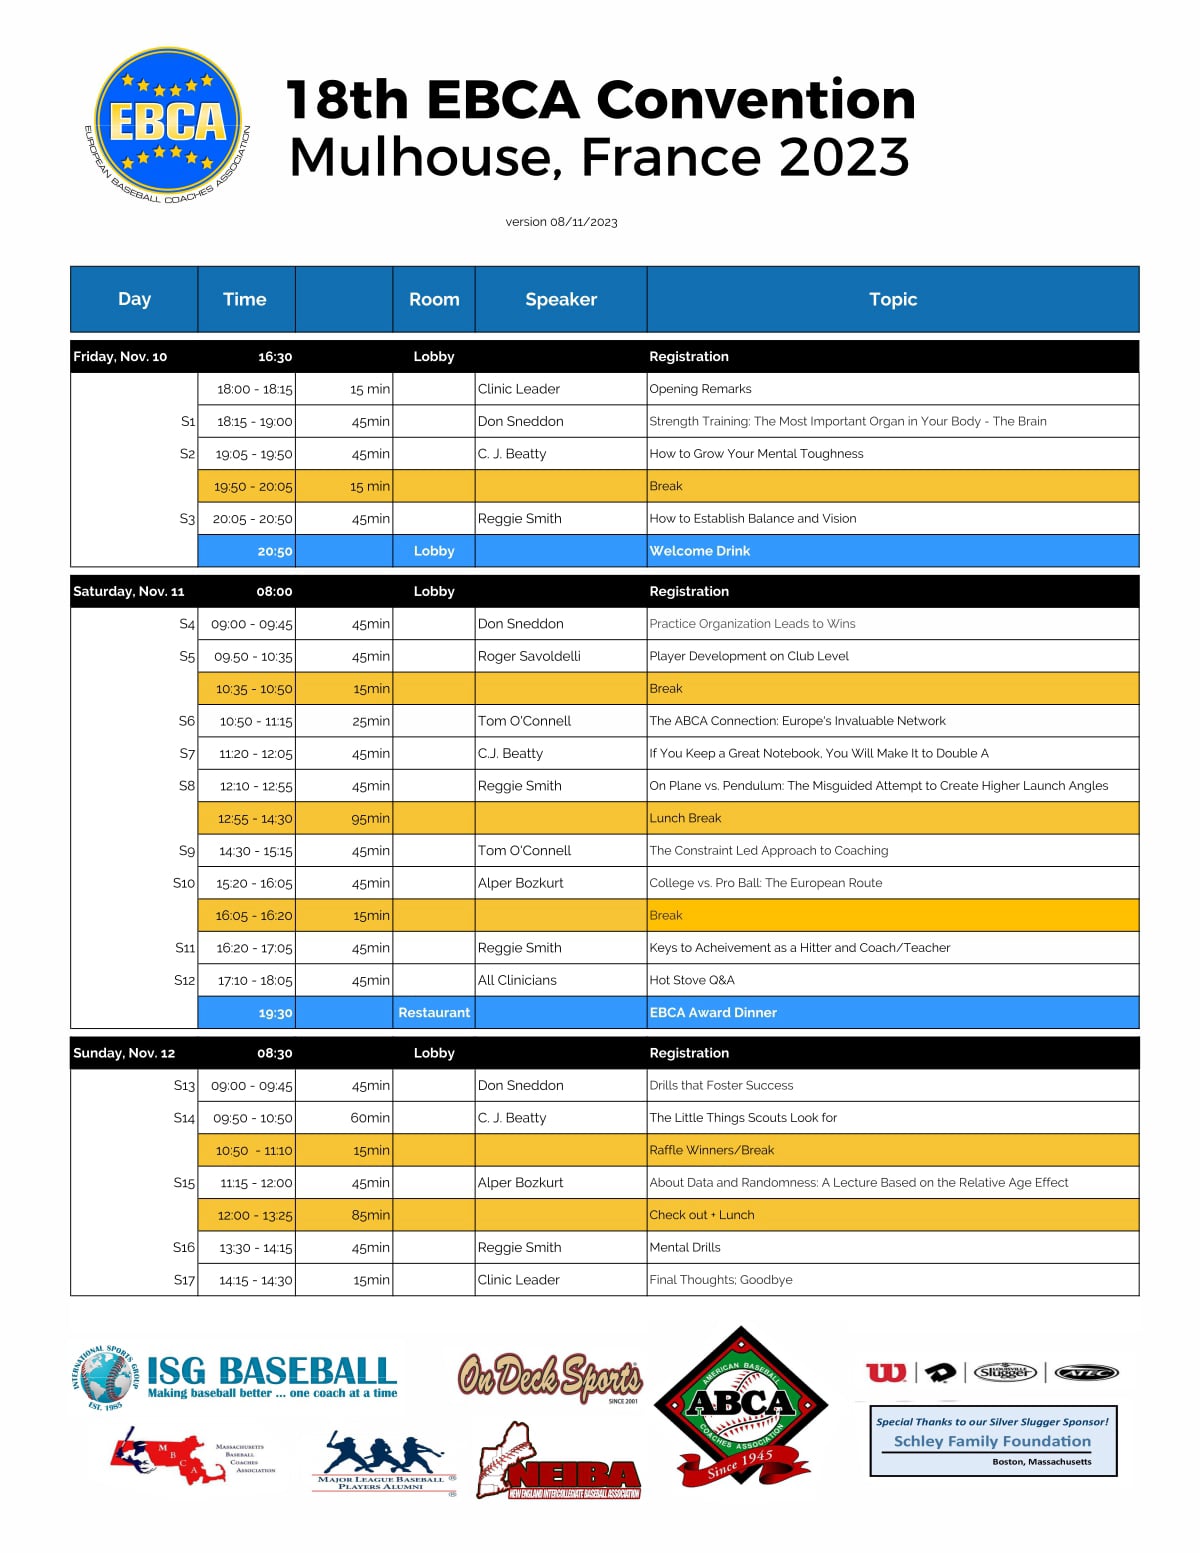 Convention Schedule - 18th EBCA Convention 2023 @ Mulhouse (F)